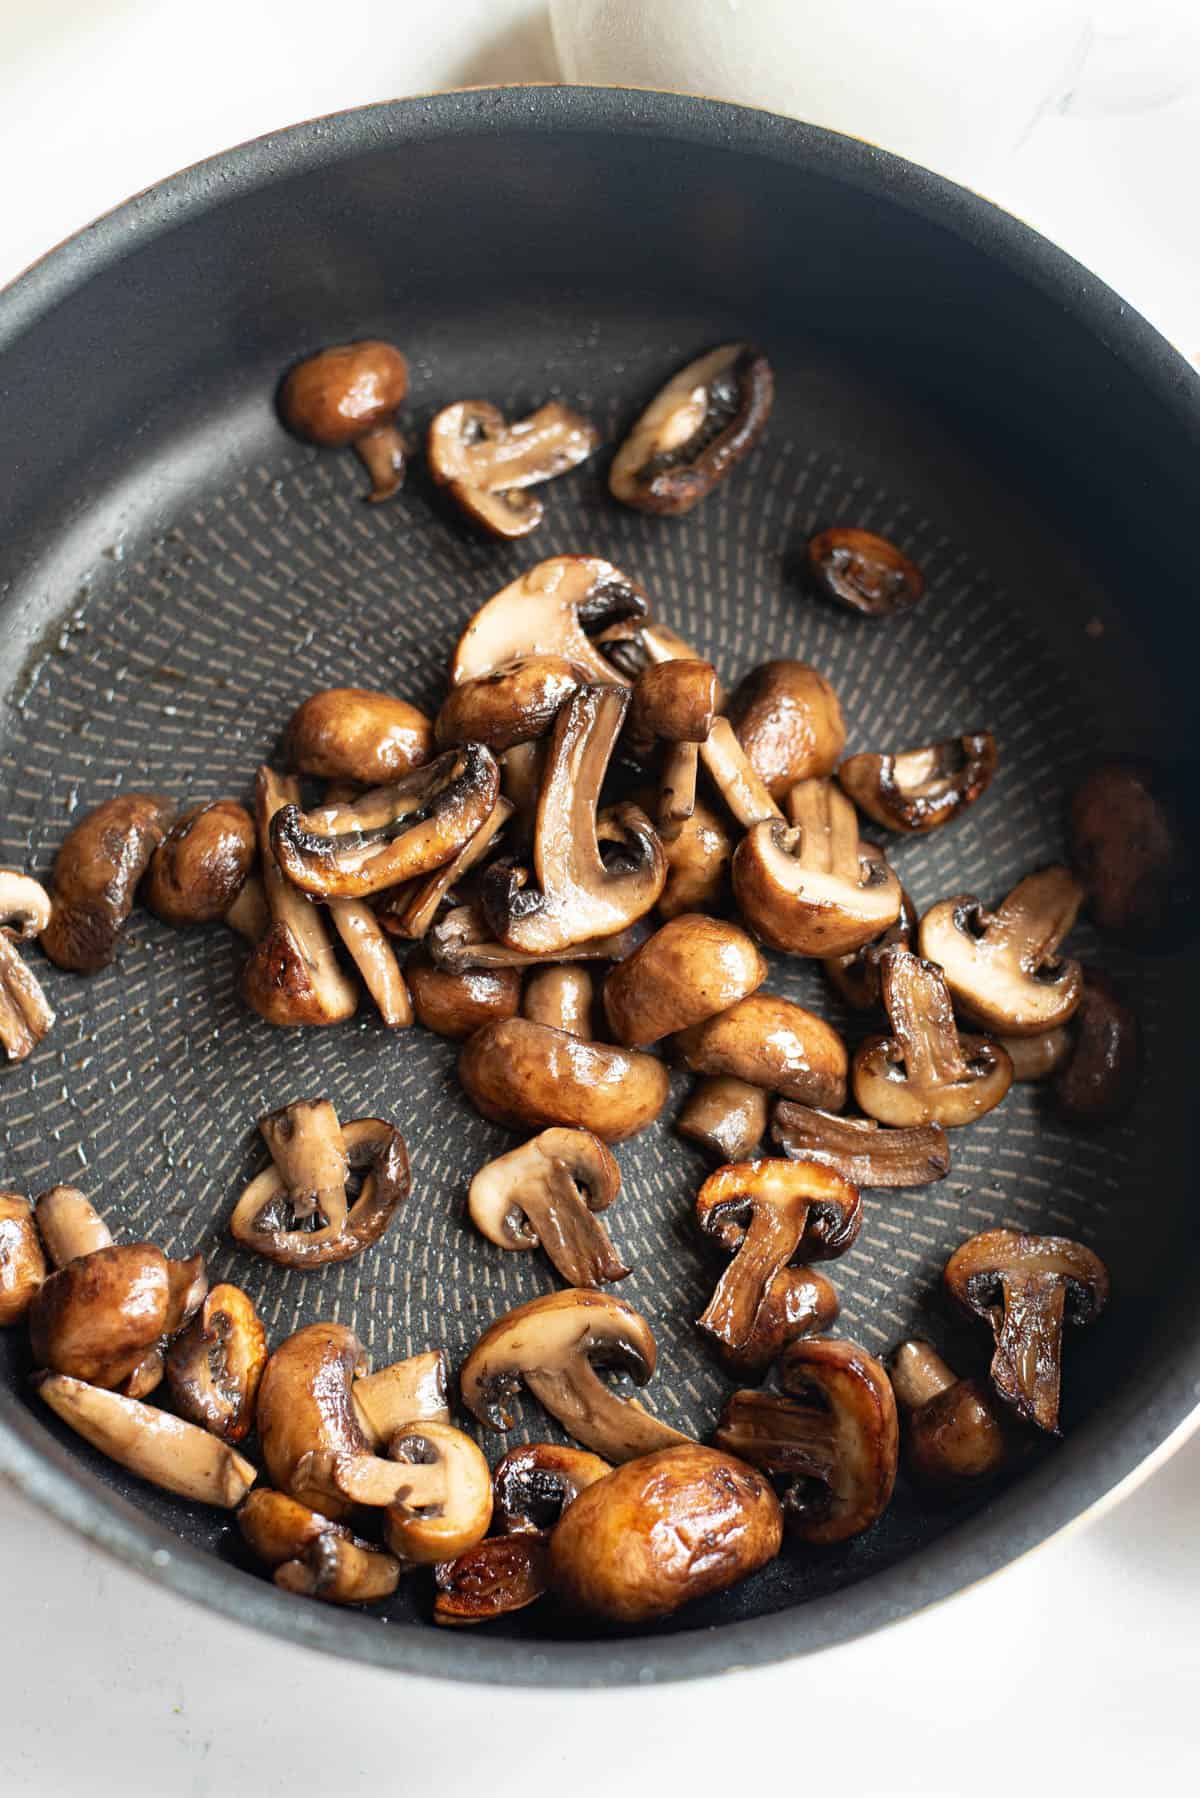 Mushrooms being sauteed in a pan.